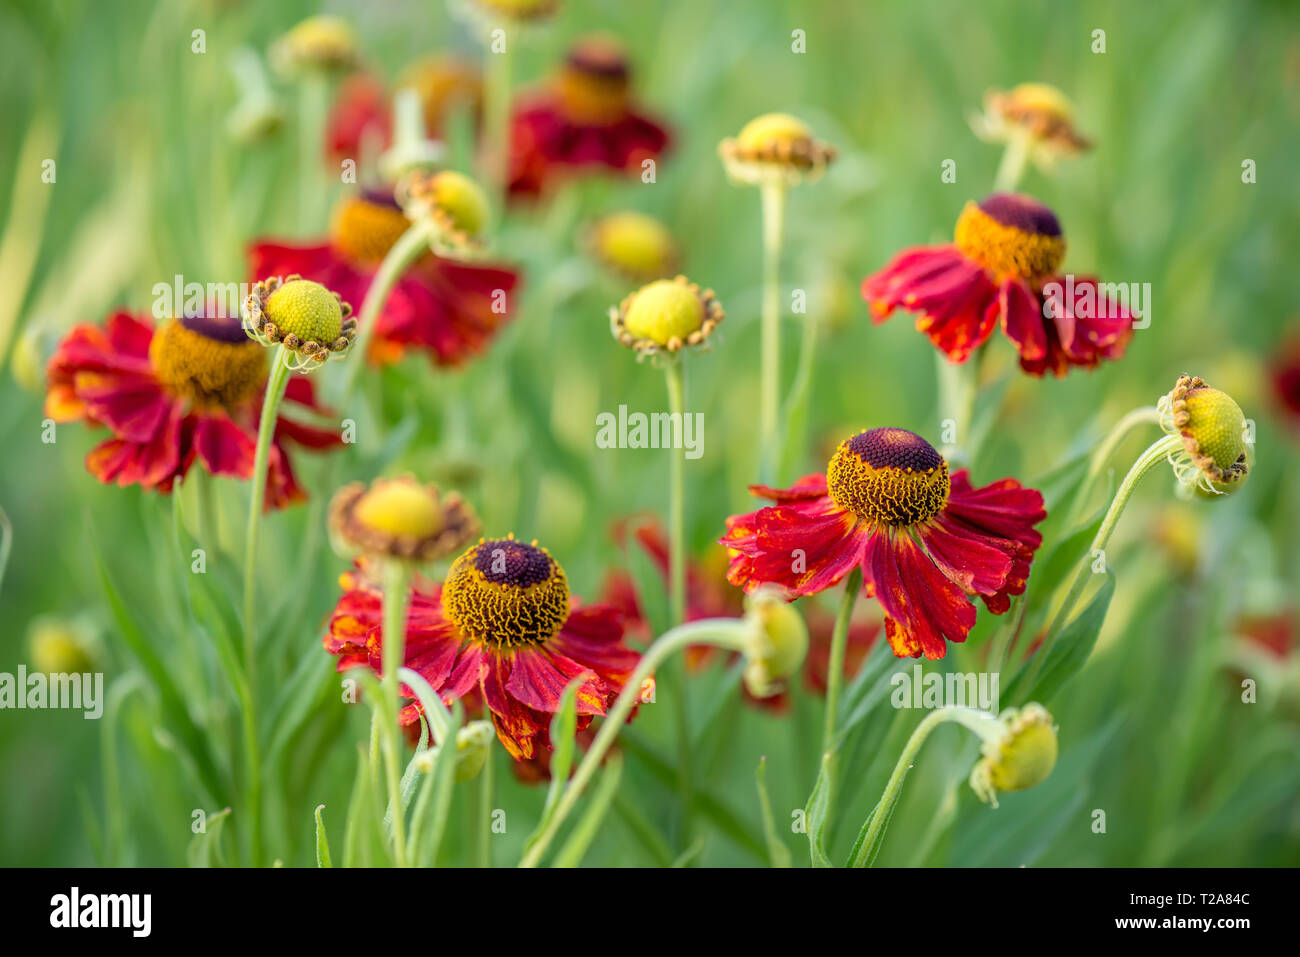 Close-up view of helenium flowers on blurred green background Stock Photo